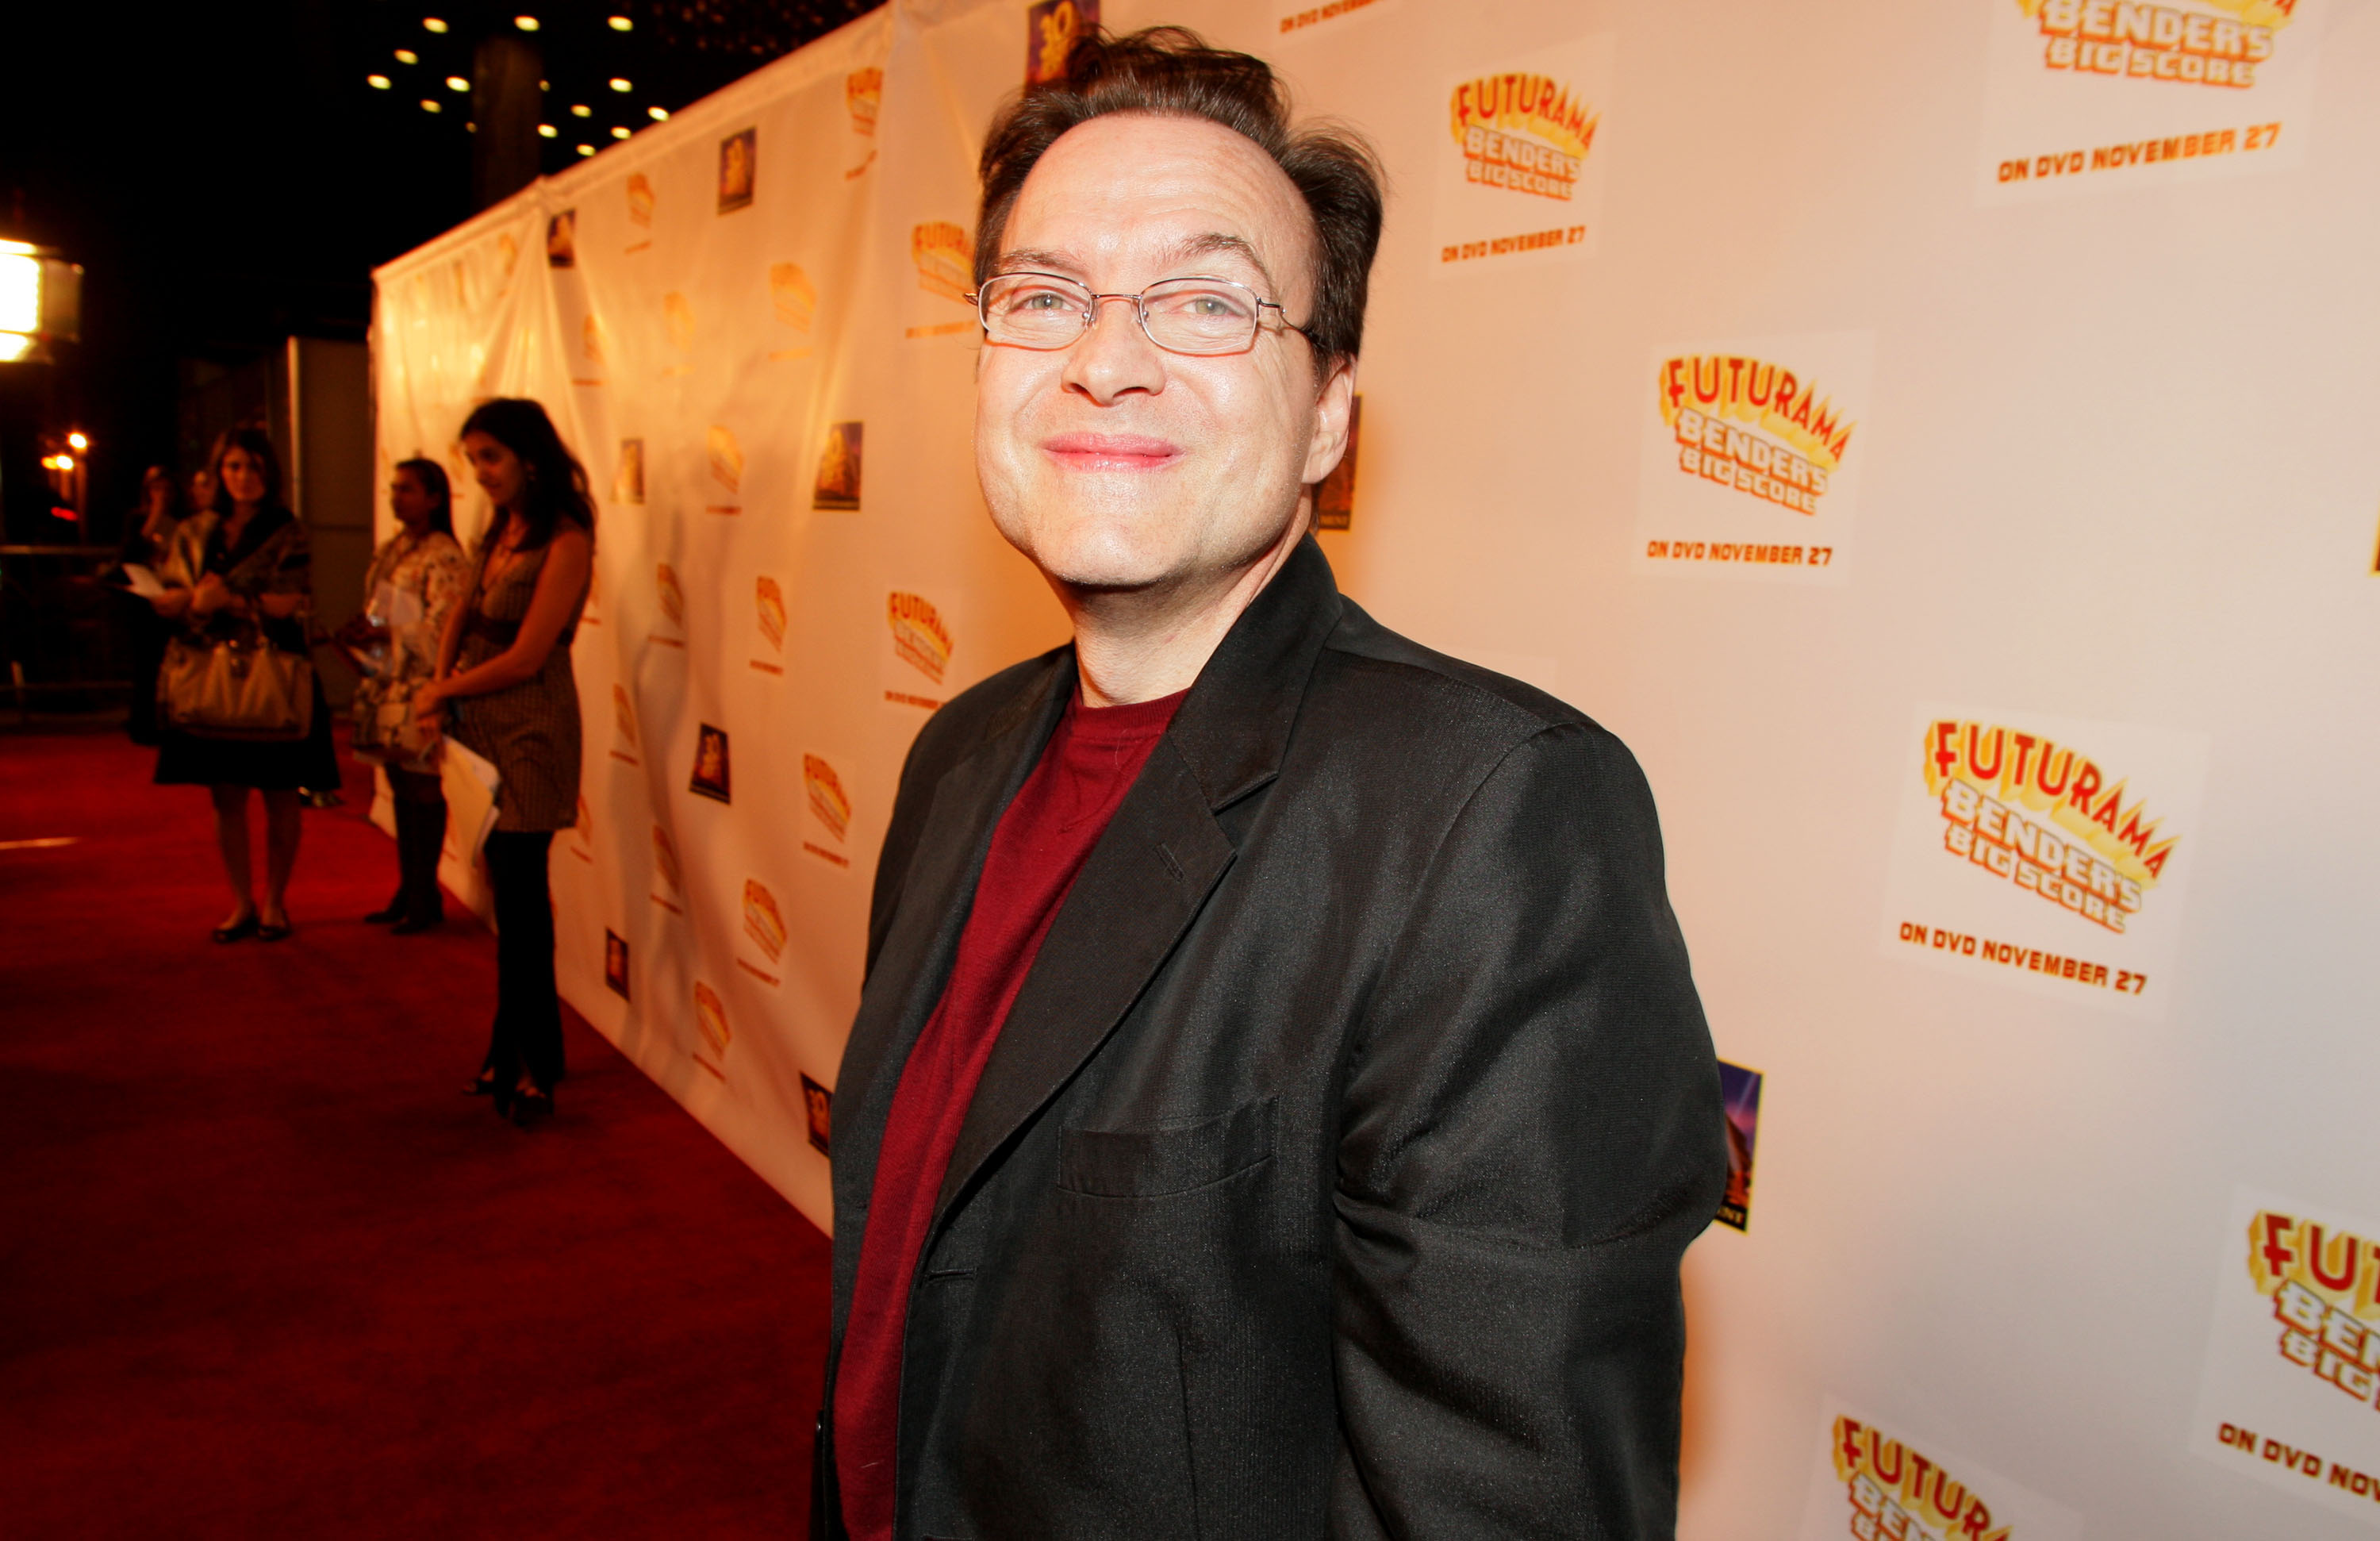 'Futurama' actor Billy West wearing a black jacket, red shirt, and glasses.